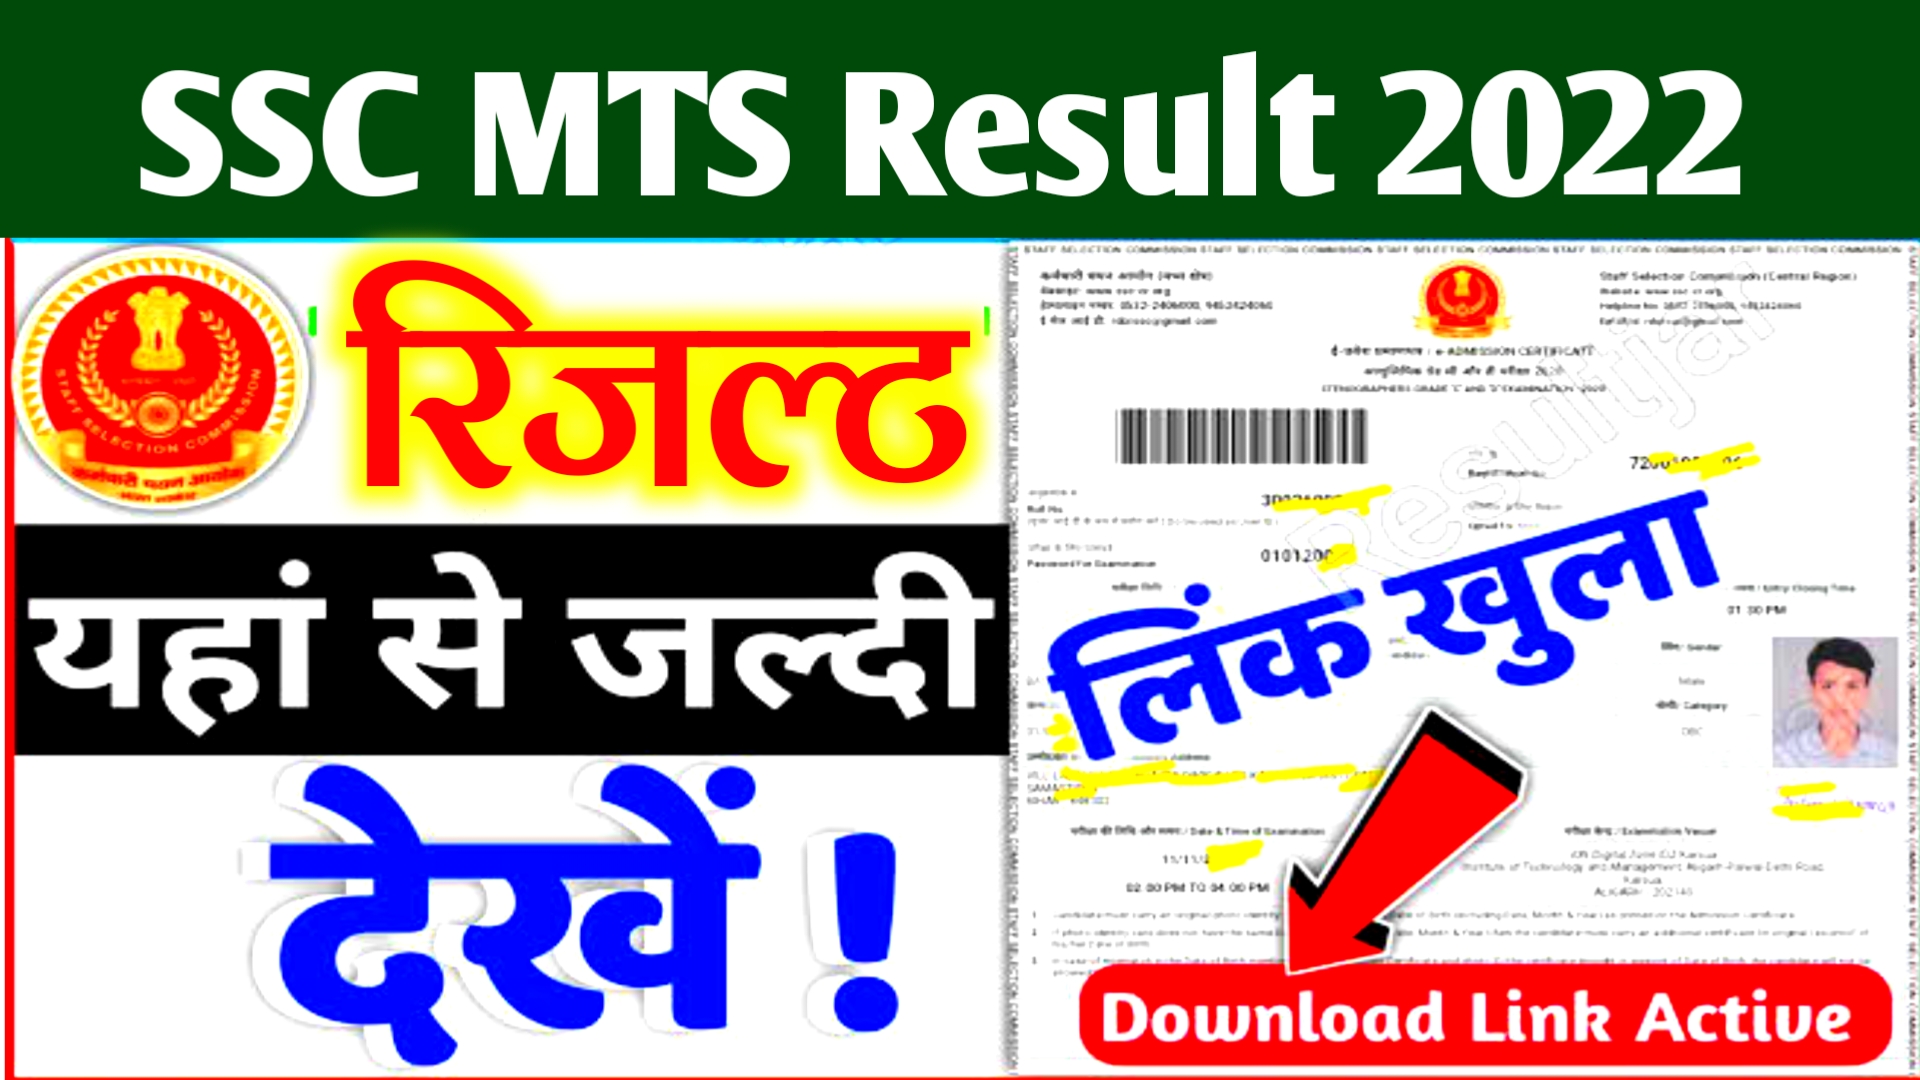 Ssc Mts Result 2022 Check Link @ssc.nic.in ~ Merit List Pdf & Cut Off